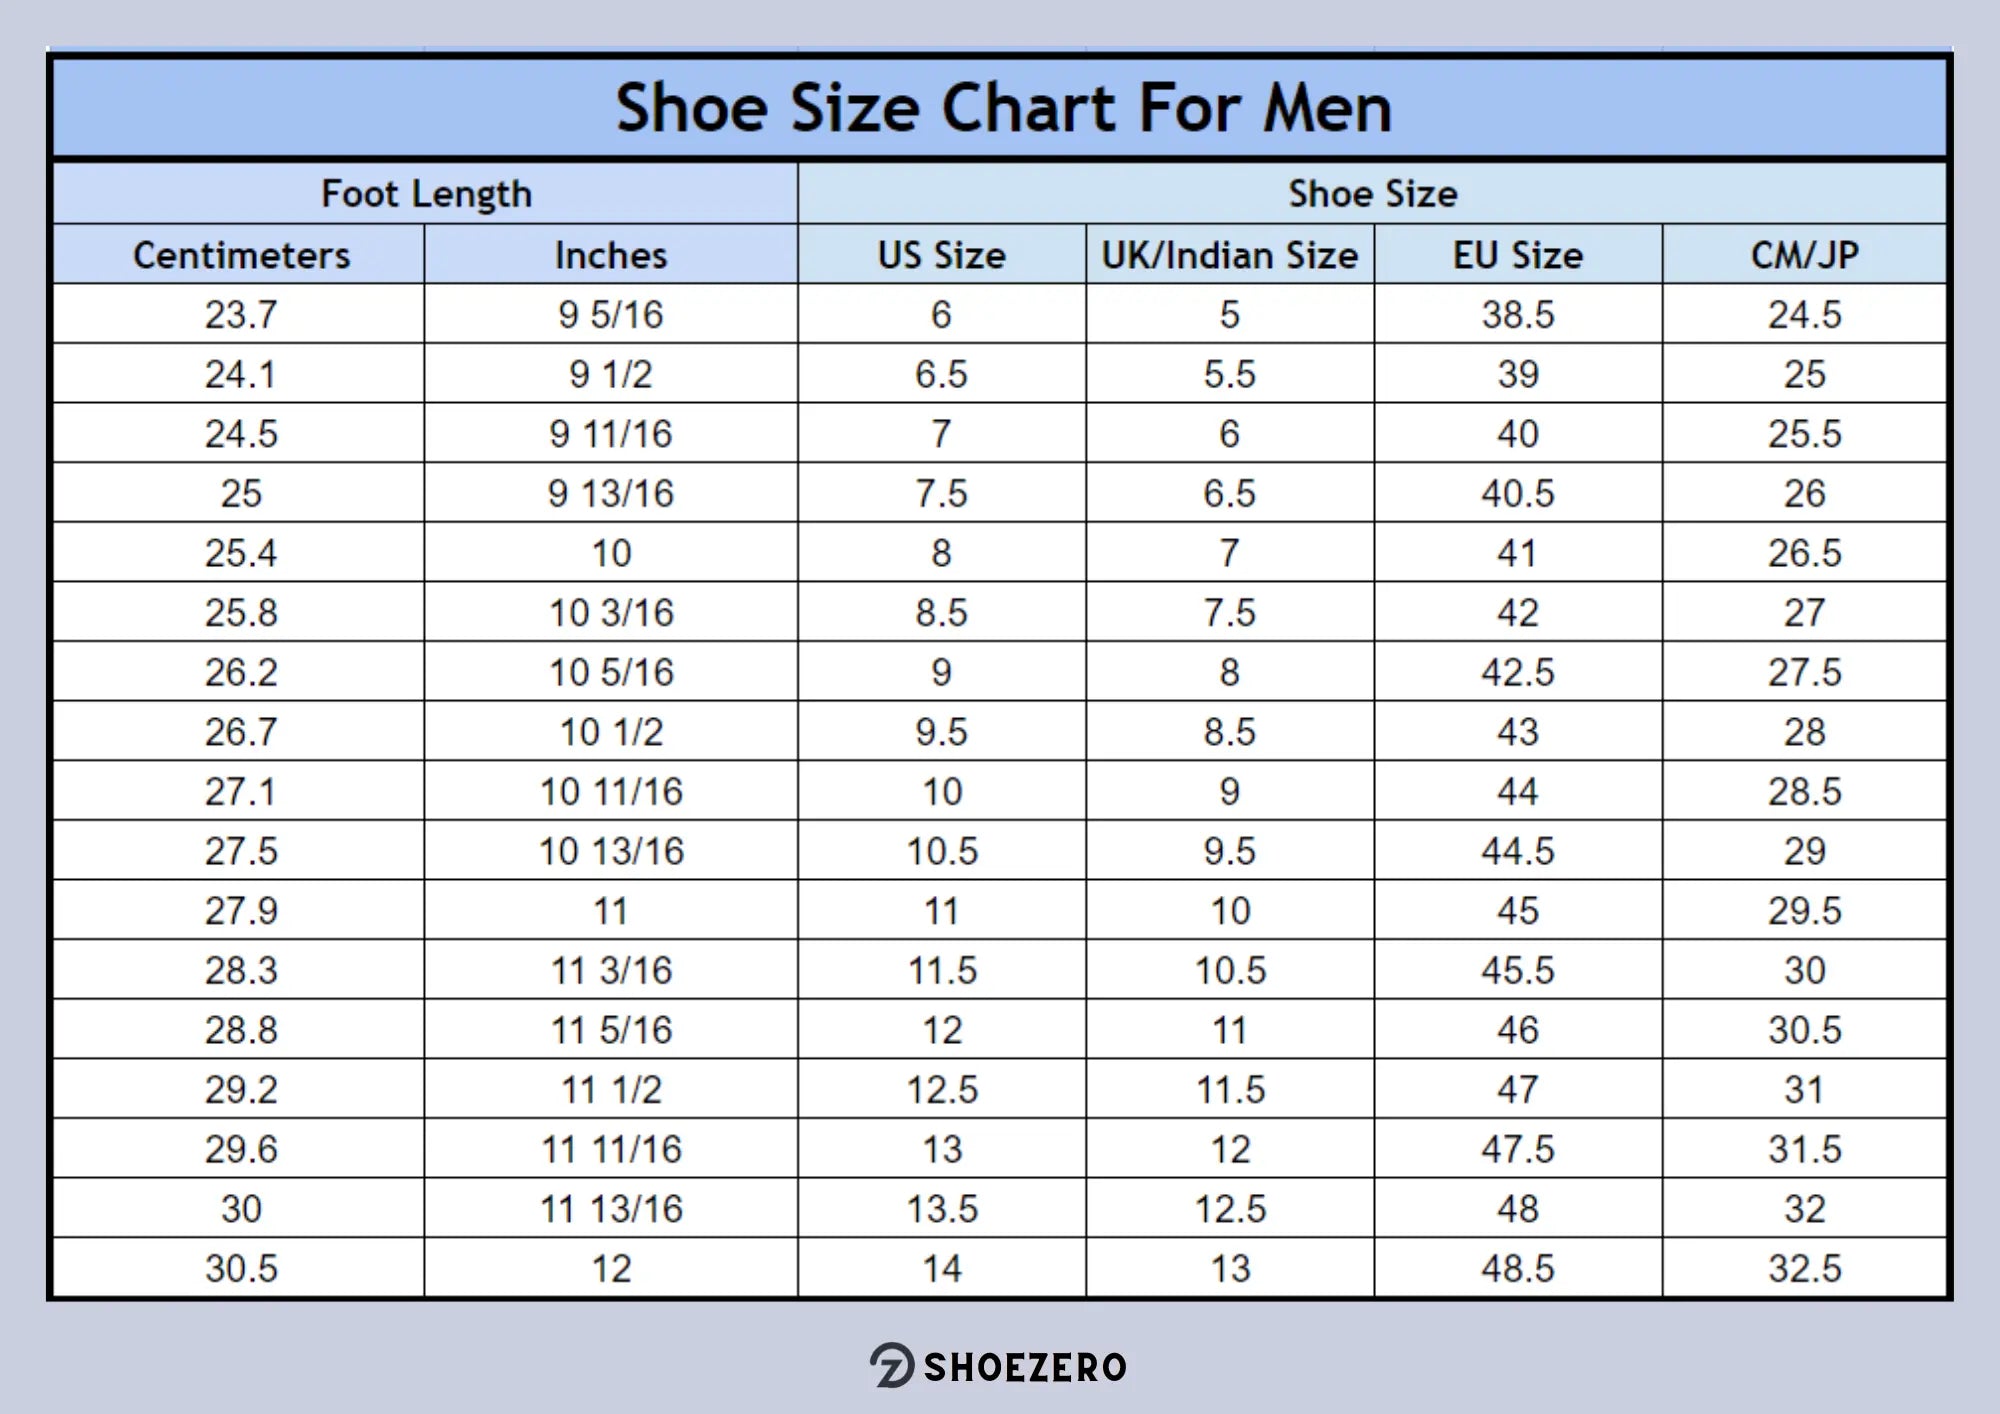 Clothing and footwear size guide table - UK, EU, RU, US